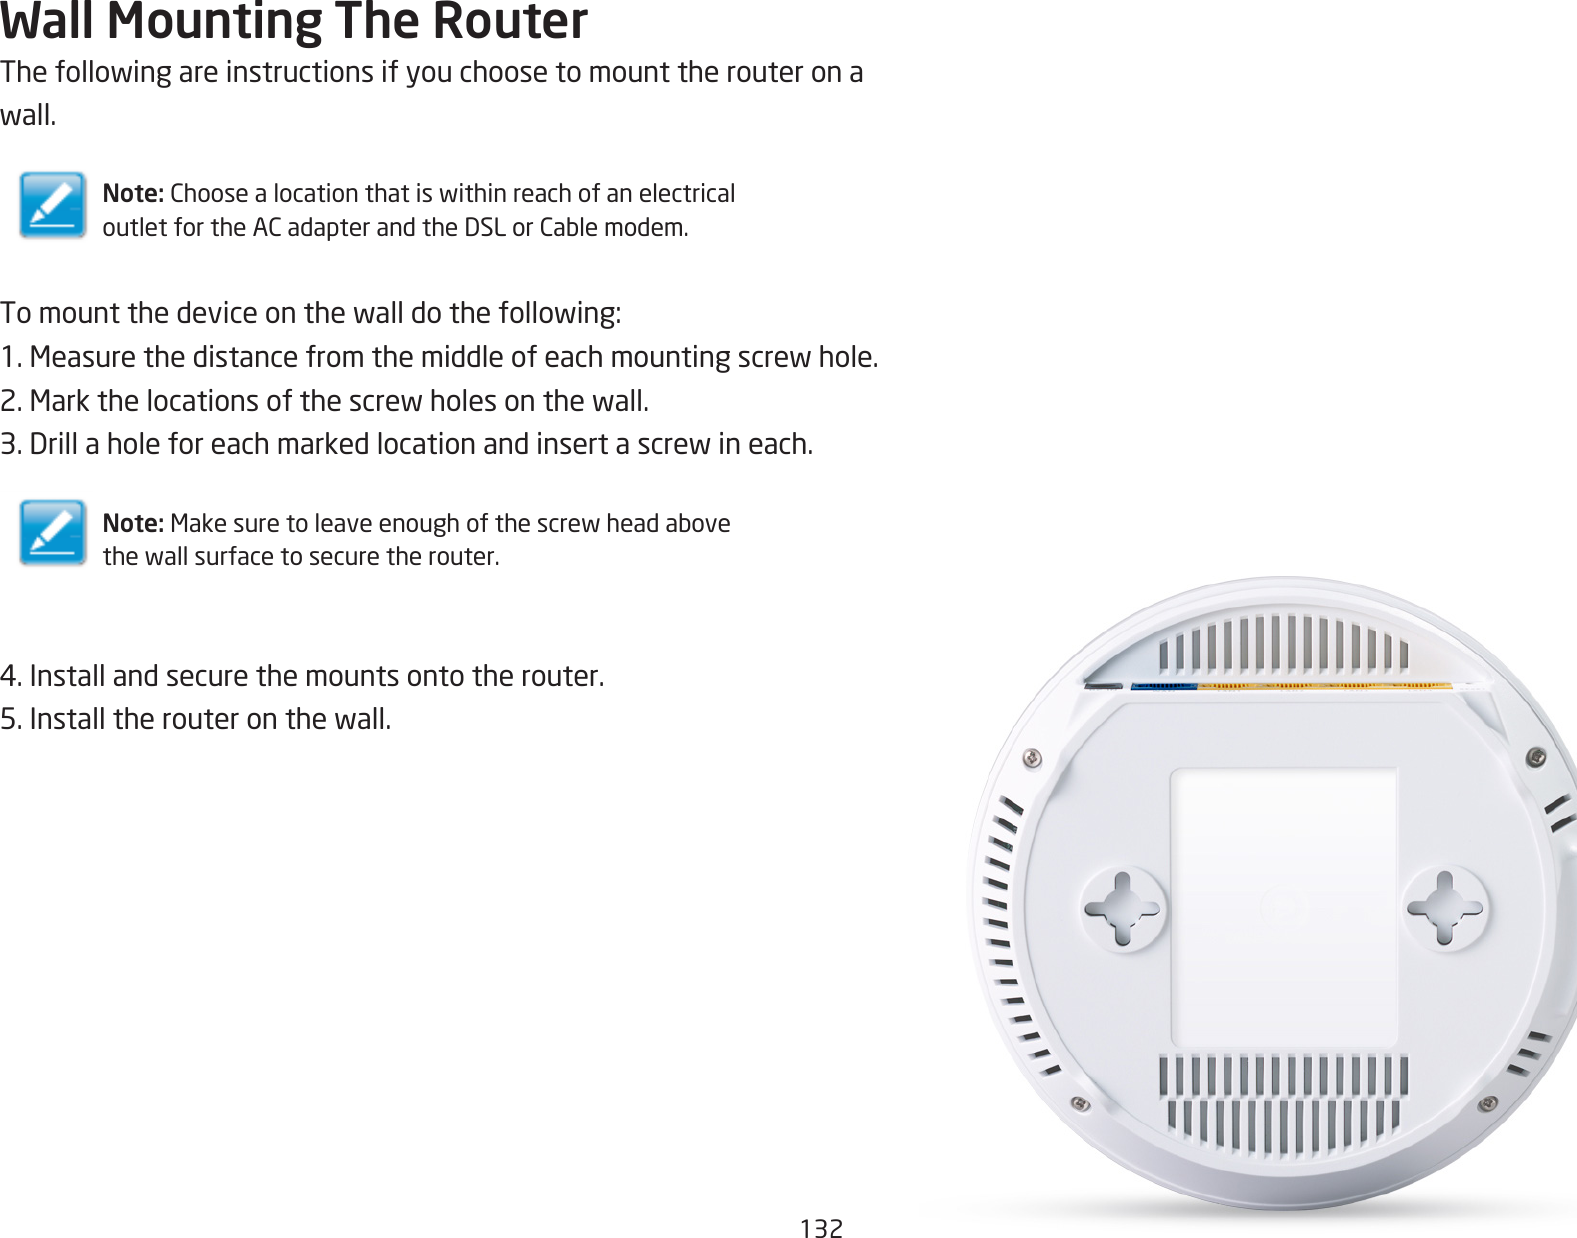 132Wall Mounting The RouterThefollowingareinstructionsifyouchoosetomounttherouteronawall.Note: ChoosealocationthatiswithinreachofanelectricaloutletfortheACadapterandtheDSLorCablemodem.Tomountthedeviceonthewalldothefollowing:1.Measurethedistancefromthemiddleofeachmountingscrewhole.2.Markthelocationsofthescrewholesonthewall.3.Drillaholeforeachmarkedlocationandinsertascrewineach.Note: Makesuretoleaveenoughofthescrewheadabovethewallsurfacetosecuretherouter.4.Installandsecurethemountsontotherouter.5.Installtherouteronthewall.